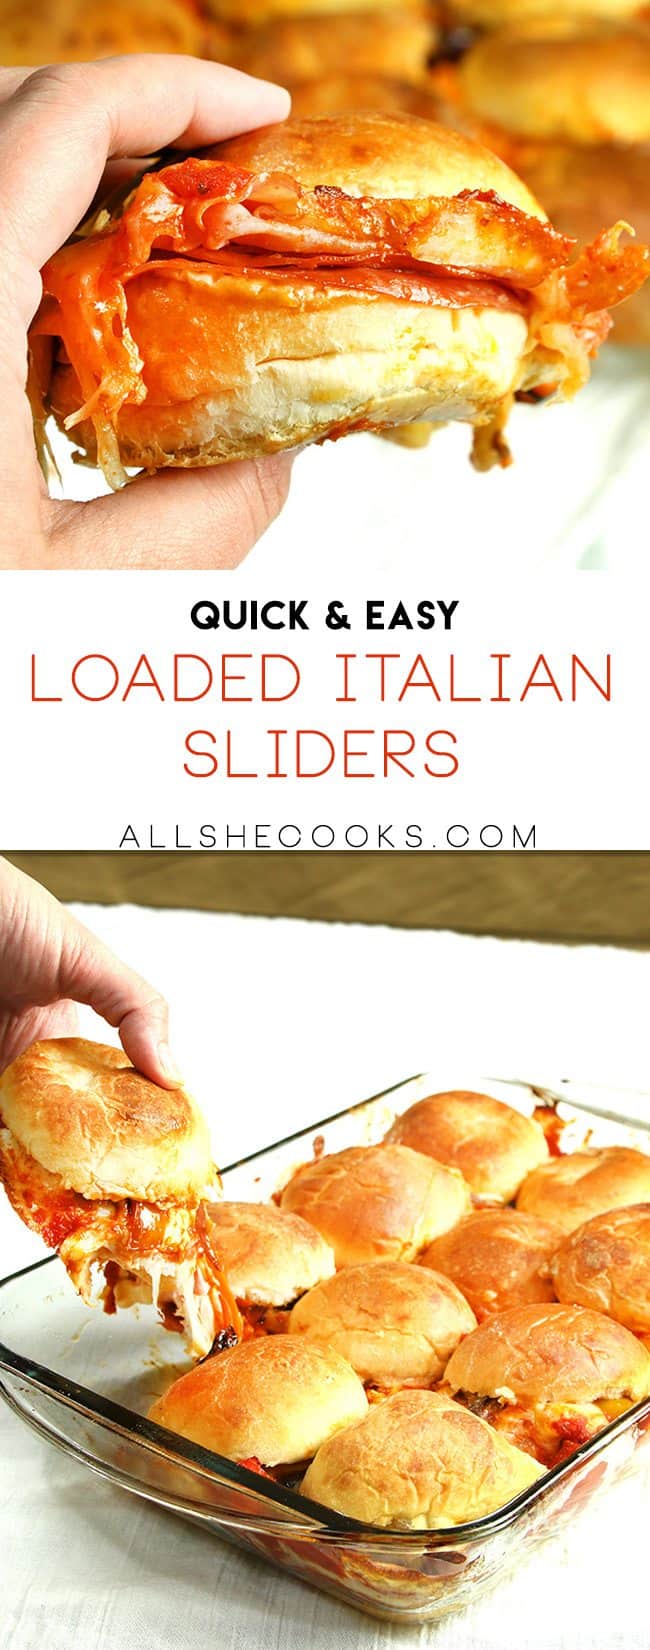 Try these Loaded Italian Sliders. This is an easy sliders recipe that is perfect for dinner or a game day get together.